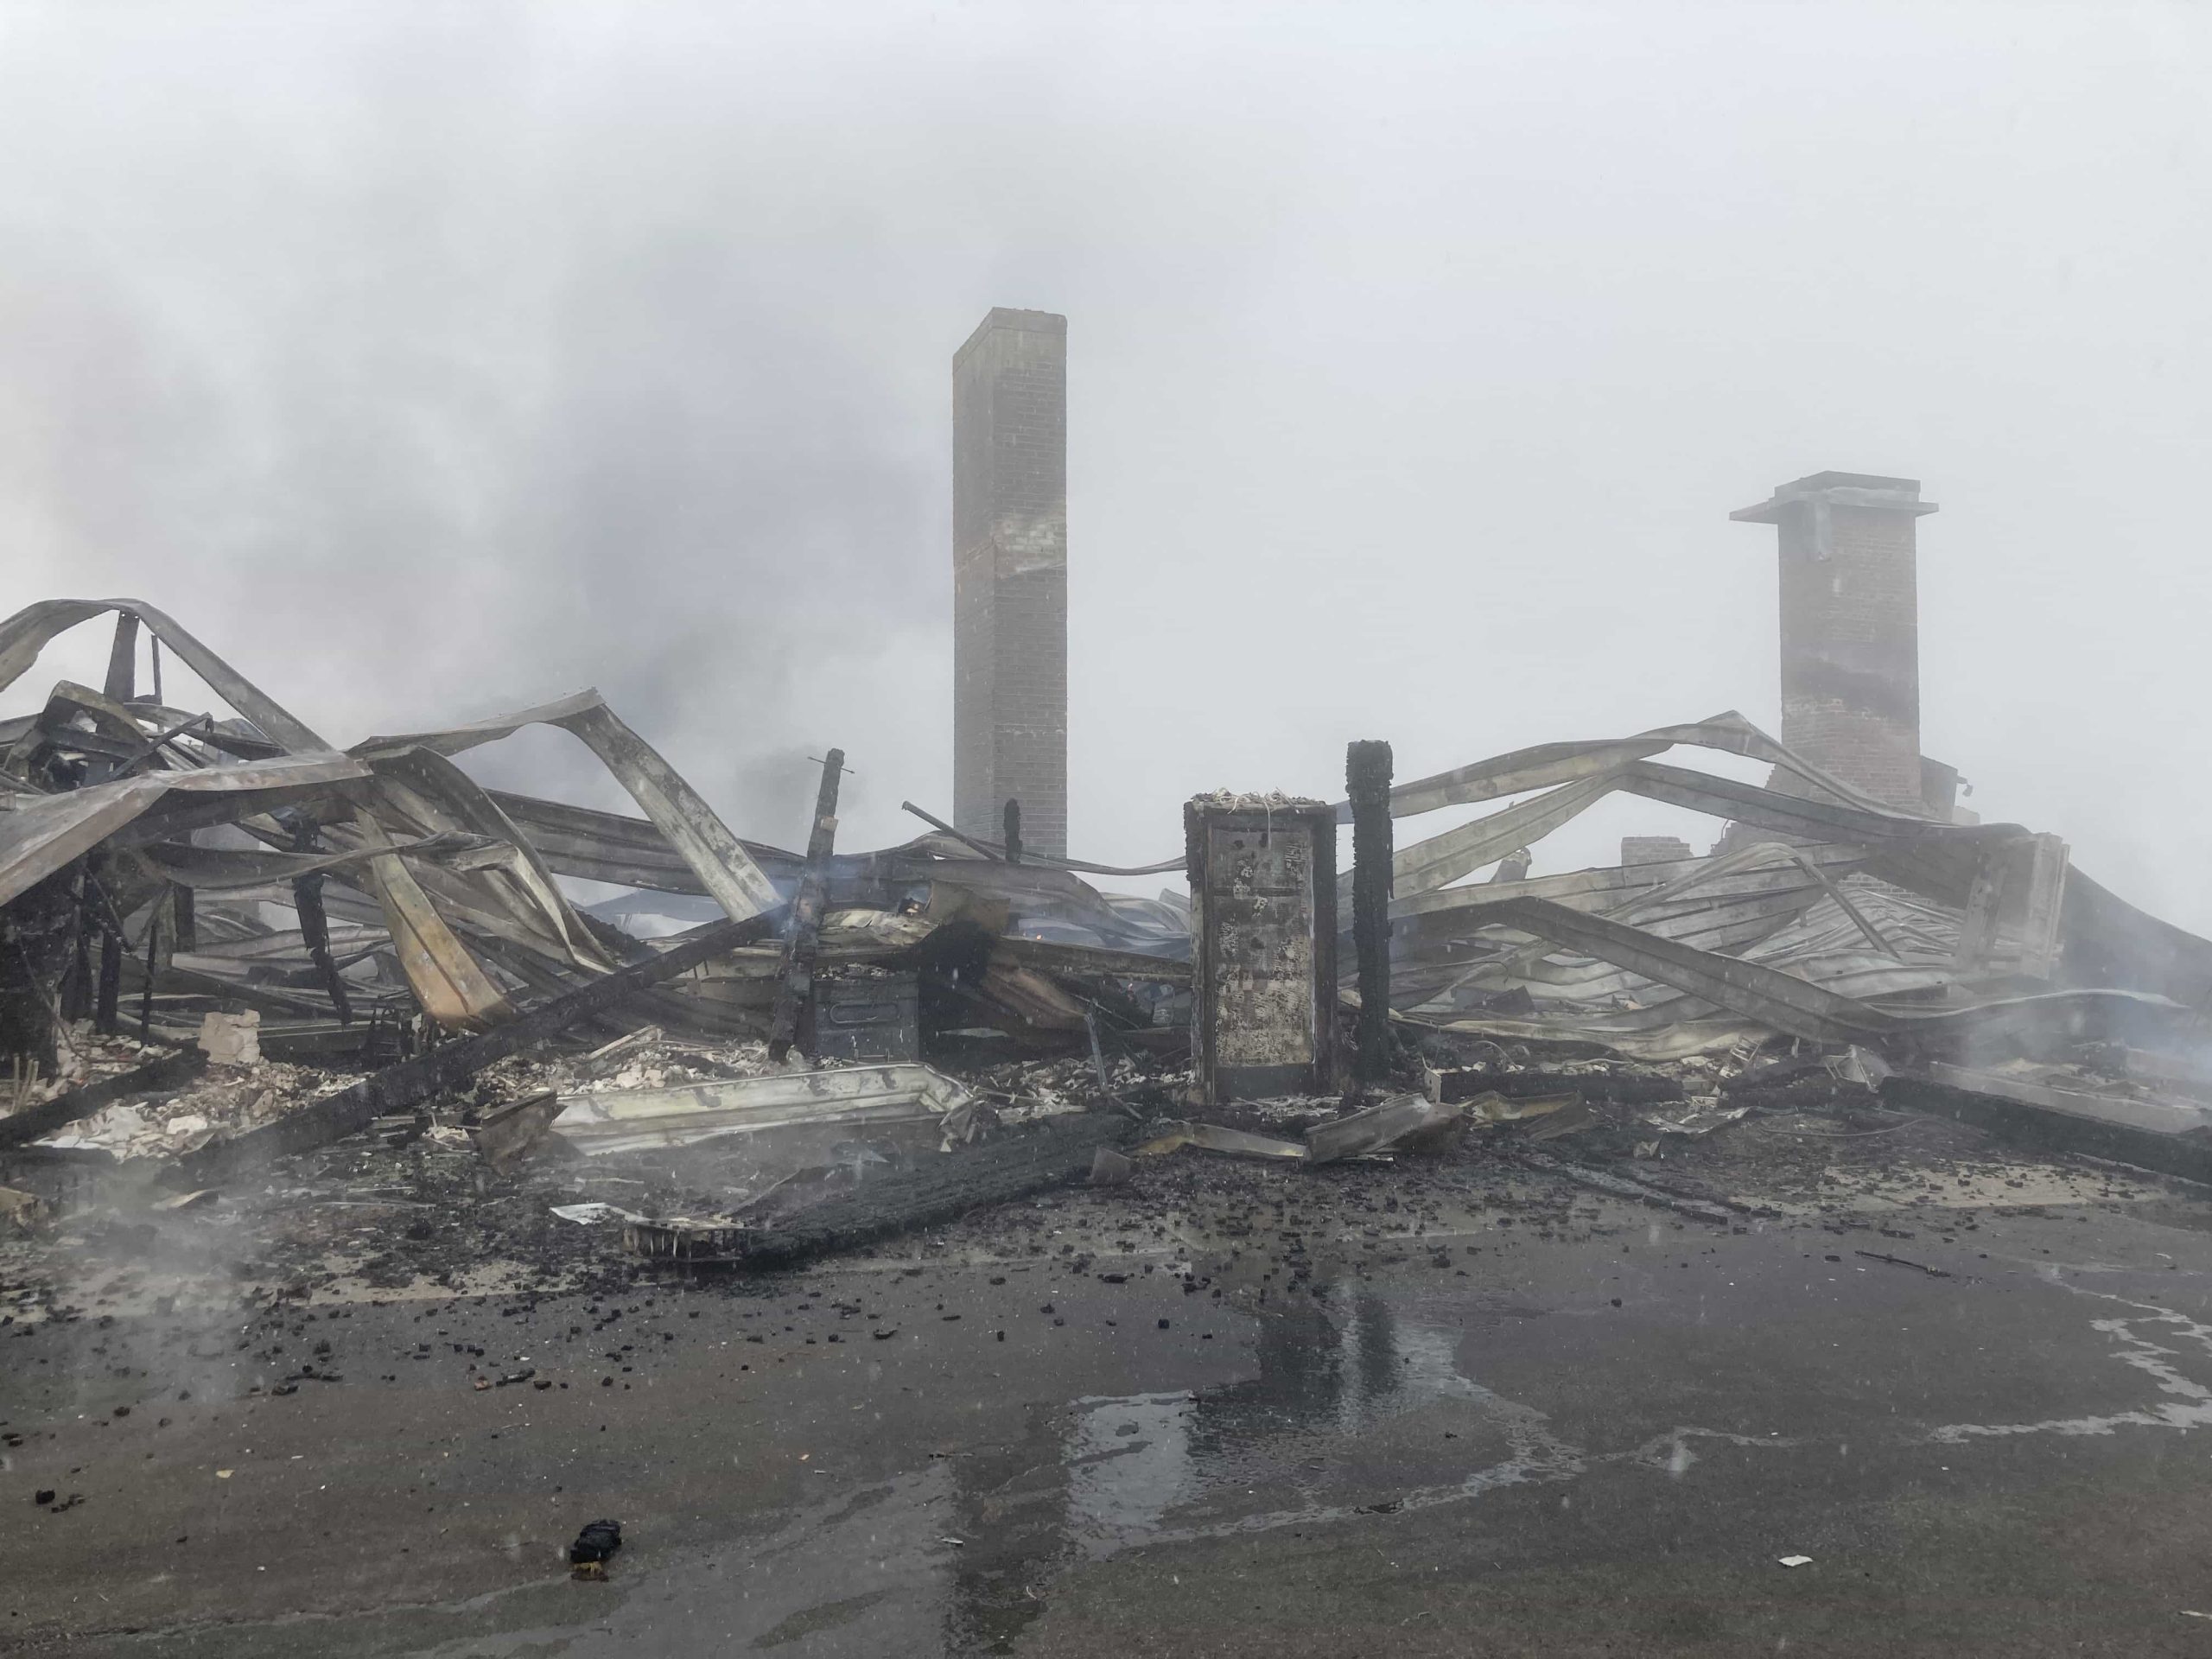 hurricane ridge day lodge destroyed by fire